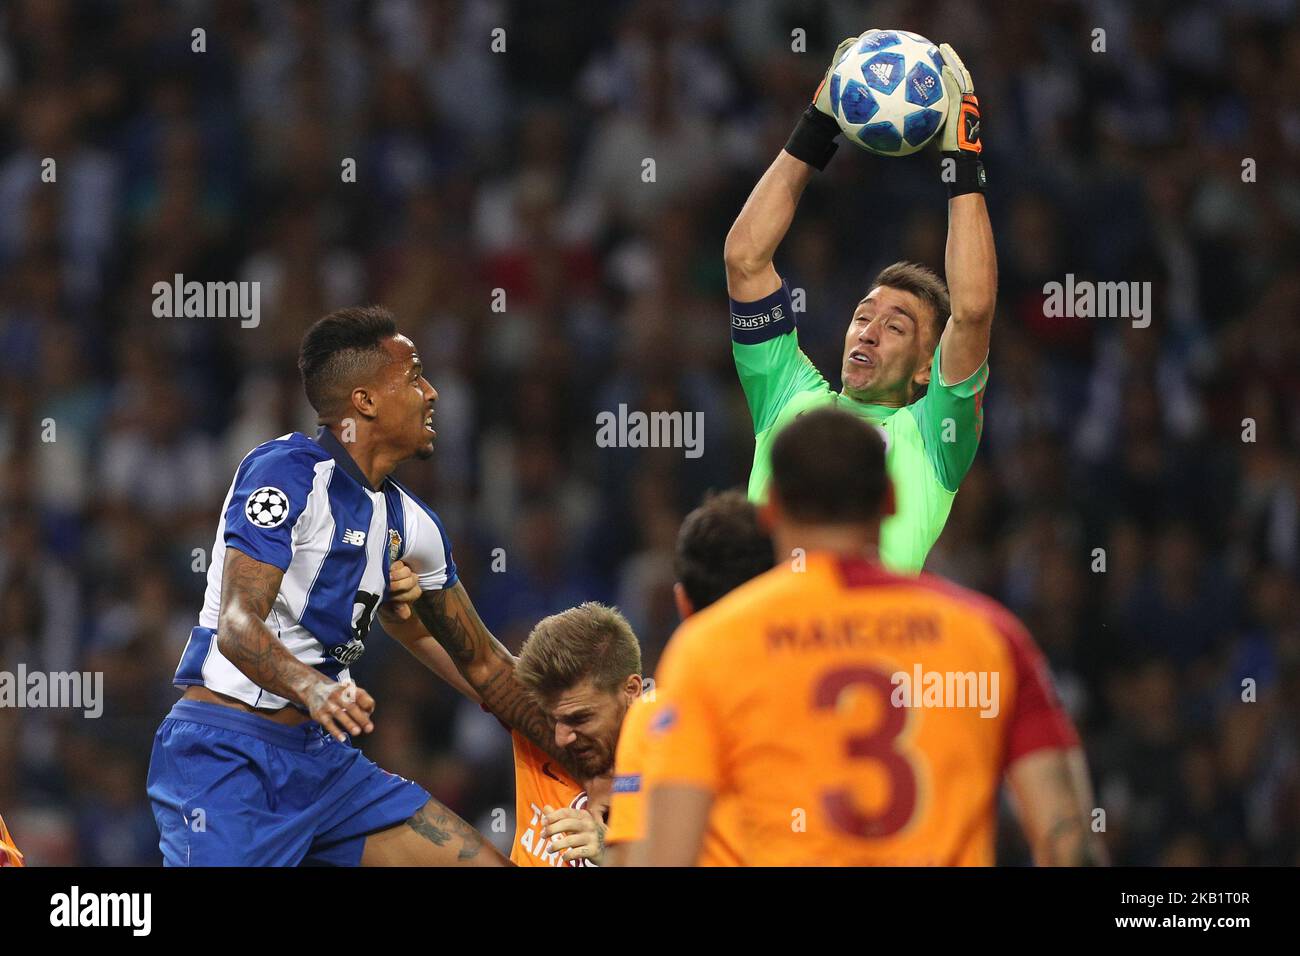 Fernando Muslera goalkeeper of Galatasaray (R) in action with Porto's Brazilian defender Eder Militao (L) during the UEFA Champions League, match between FC Porto and Galatasaray, at Dragao Stadium in Porto on October 3, 2018 in Porto, Portugal. (Photo by Paulo Oliveira / DPI / NurPhoto) Stock Photo